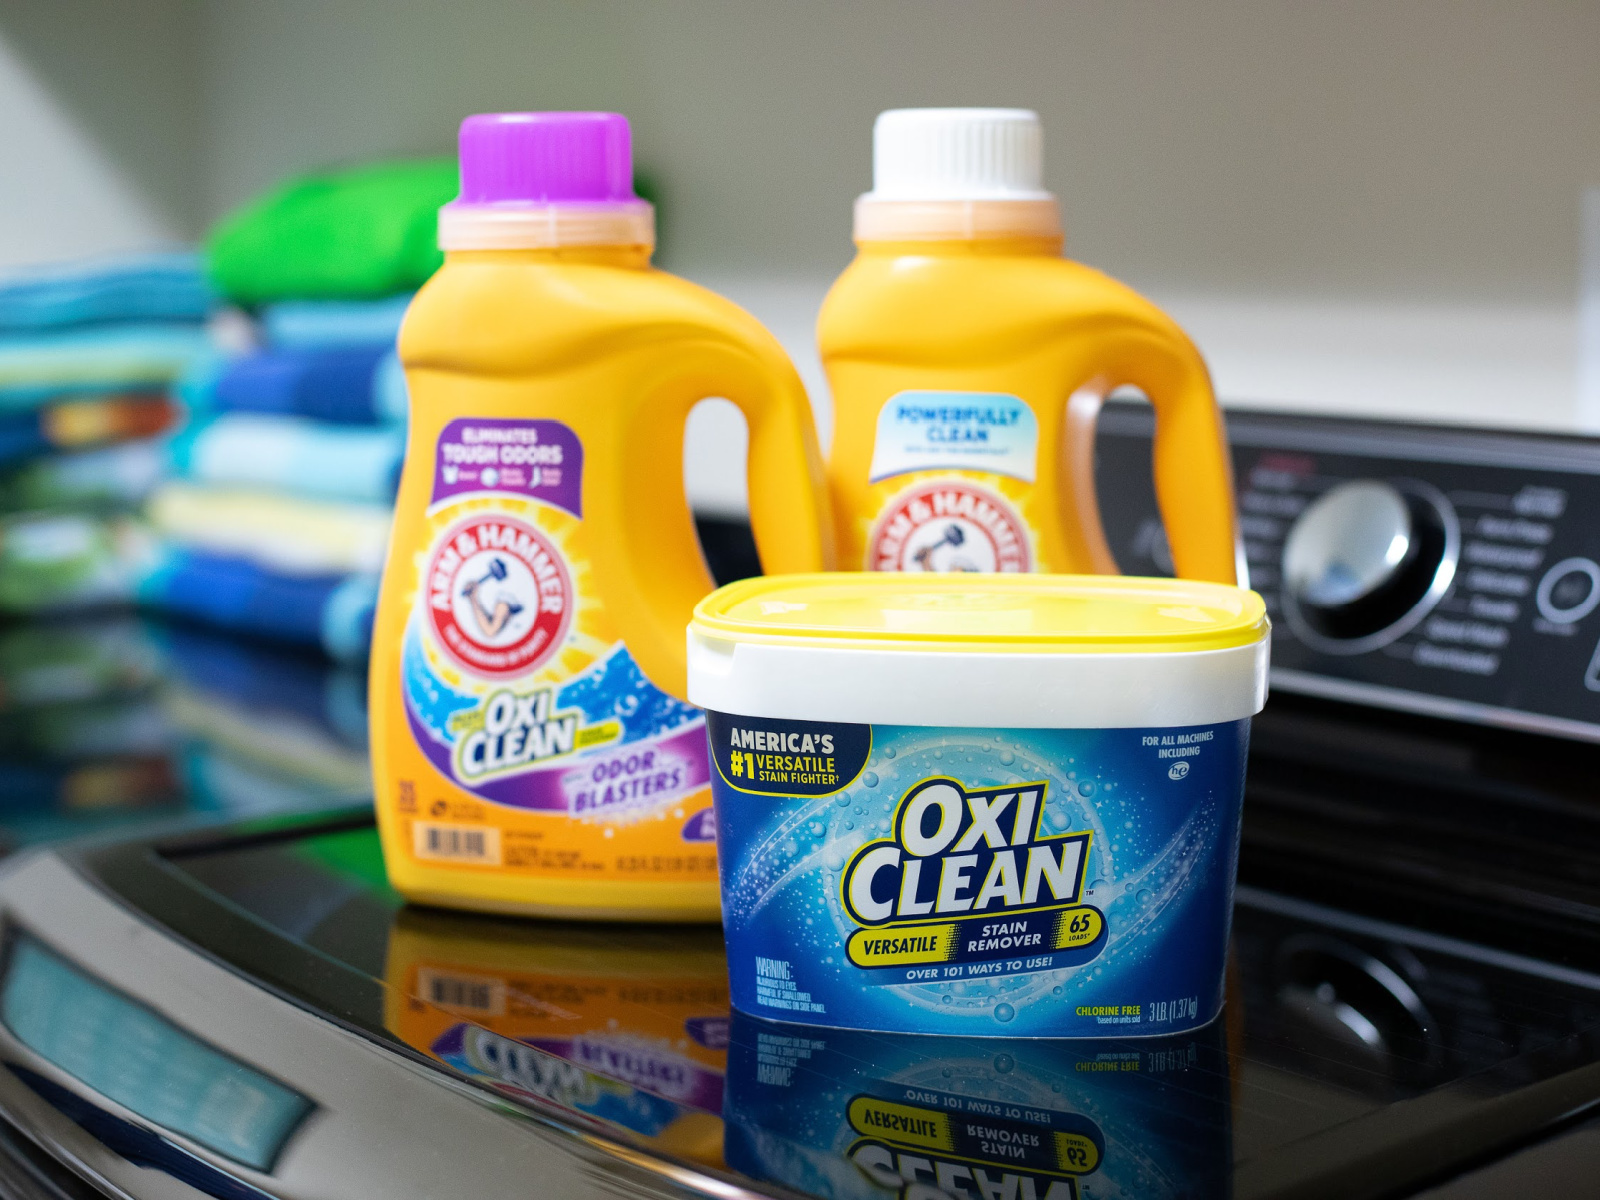 Rally To Win With ARM & HAMMER™ and OxiClean™ - Bring Home The Products You Trust & Enter To Win Great Prizes! on I Heart Publix 3